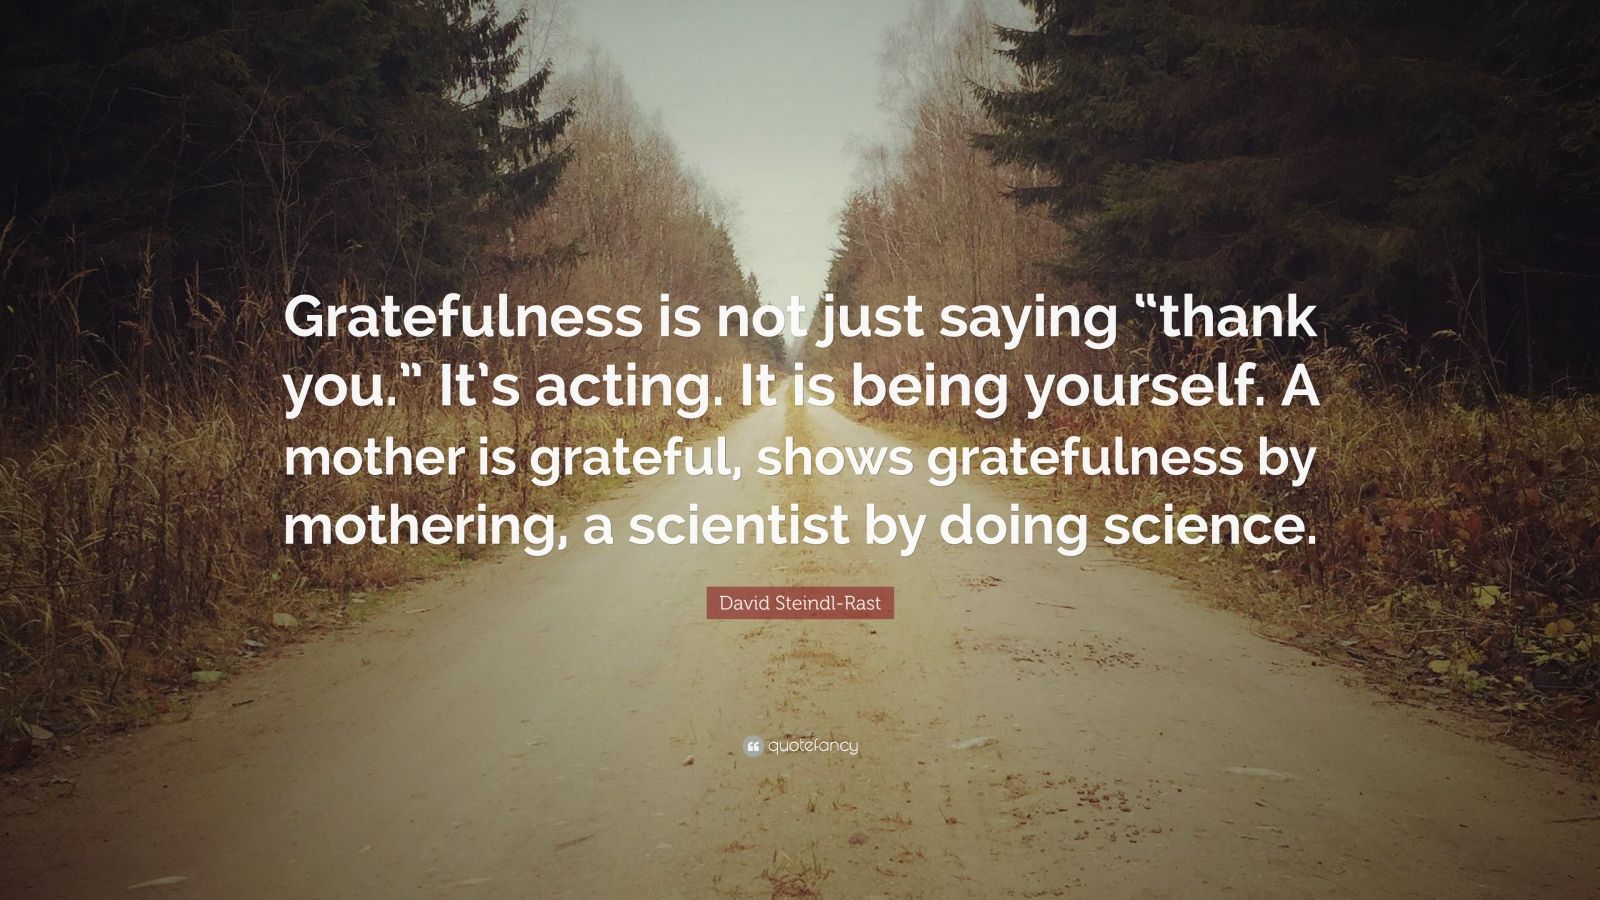 David Steindl-Rast Quote: “Gratefulness is not just saying “thank you